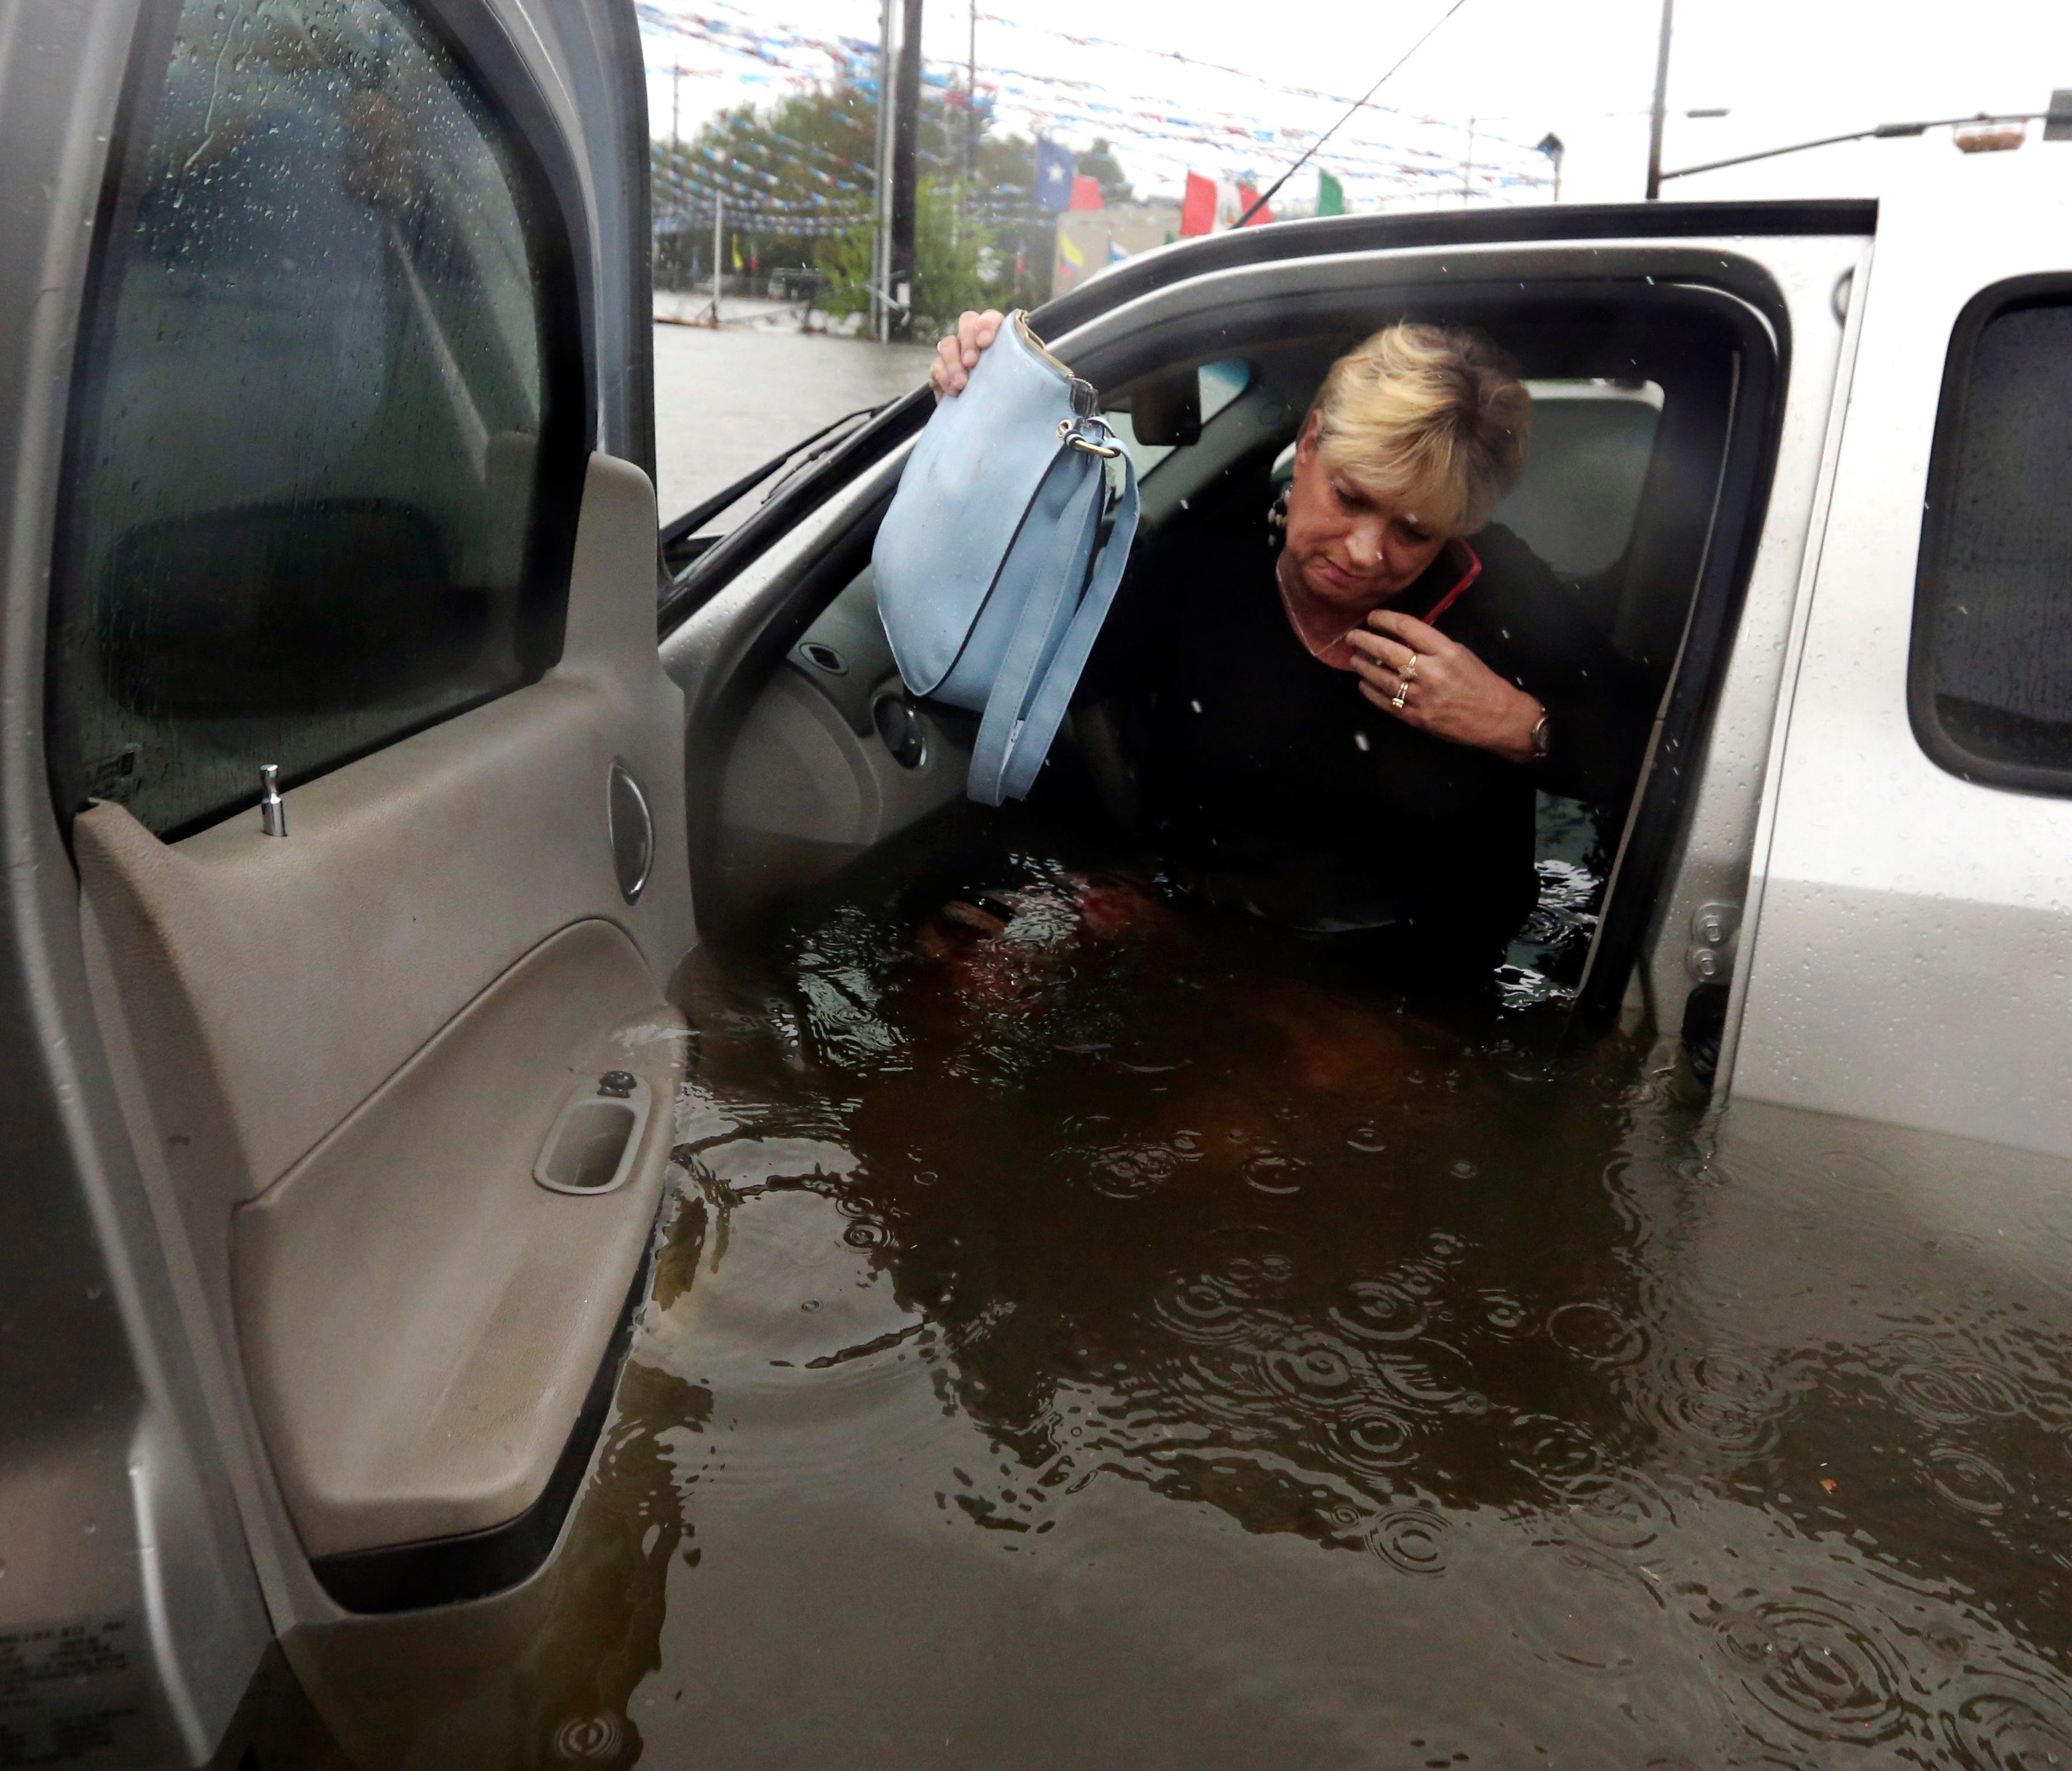 Rhonda Worthington talks on her cellphone with a 911 dispatcher as she gets out of her car after her vehicle stalled in rising floodwaters from Harvey in Houston on Aug. 28.